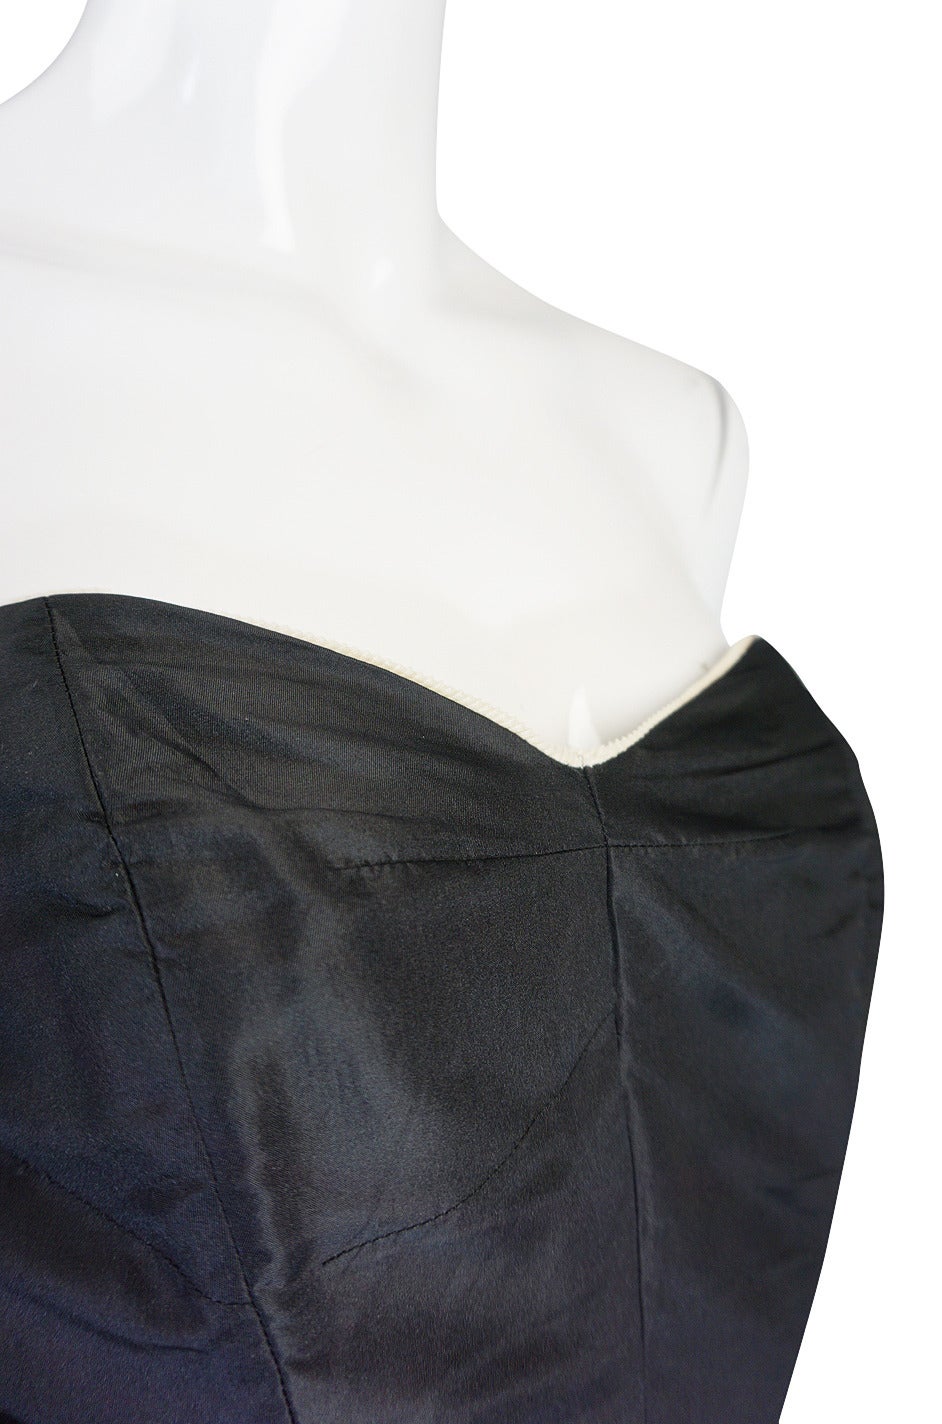 Beautiful 1950s Black Strapless Bonwit Teller Silk Gown For Sale 3